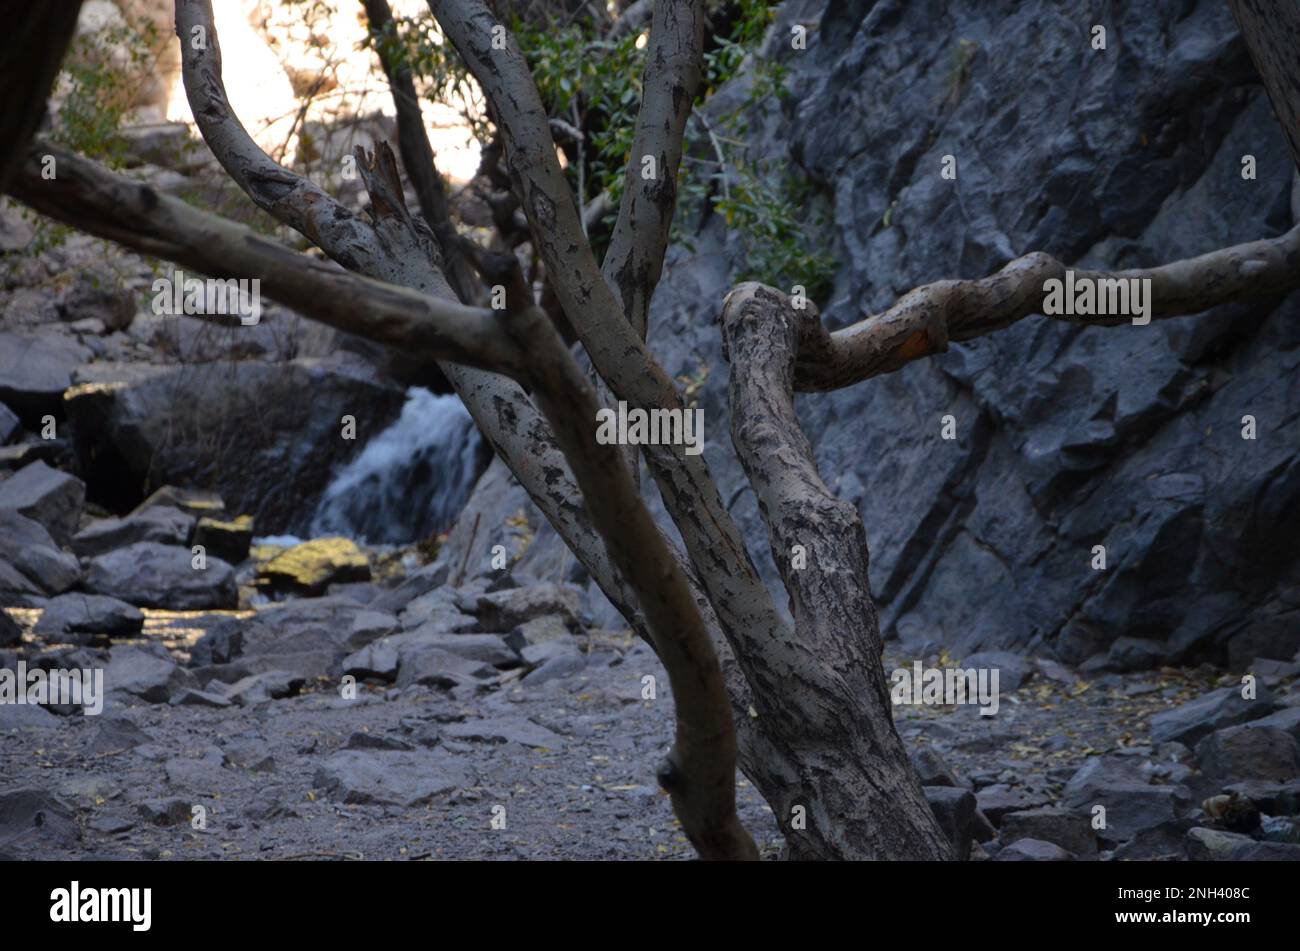 bizarre old tree with splashing water in background Stock Photo